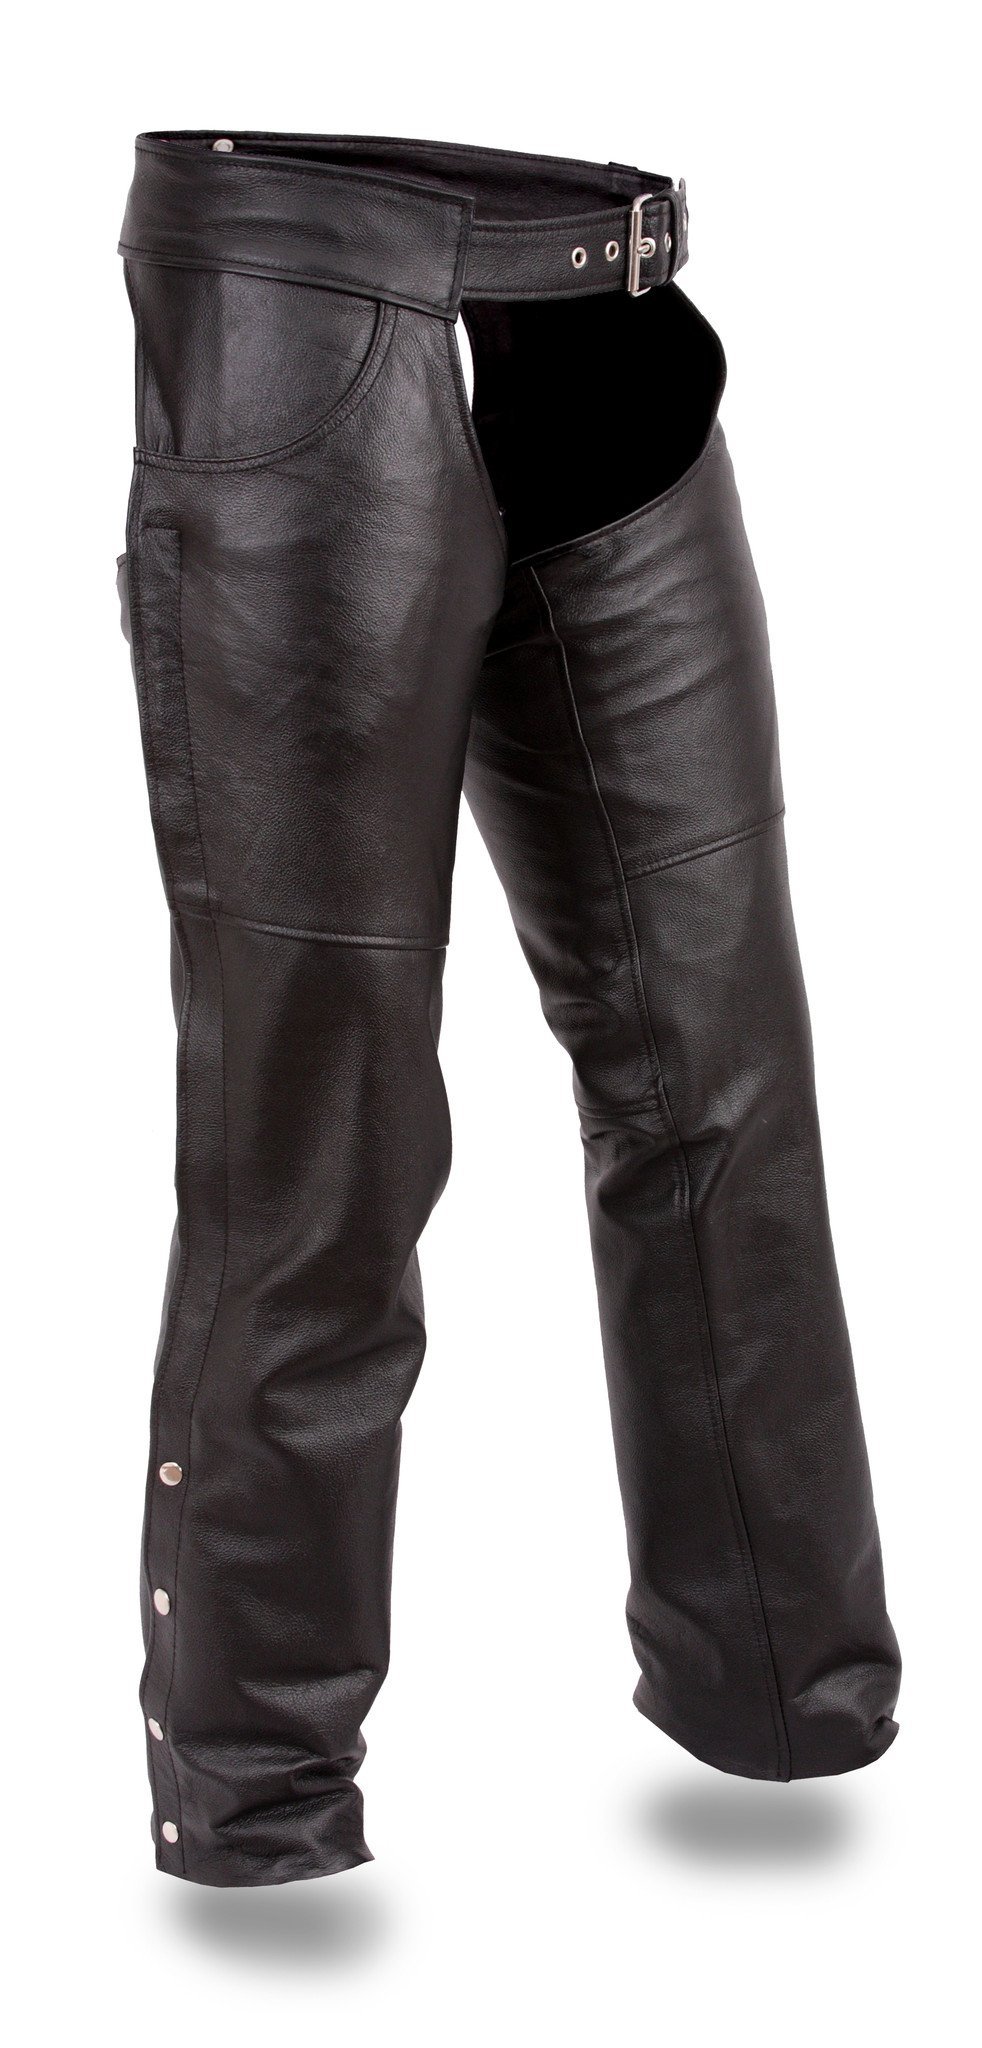 Rally - Unisex Leather Motorcycle Riding Chaps - SKU GRL-FMM835CC-FM